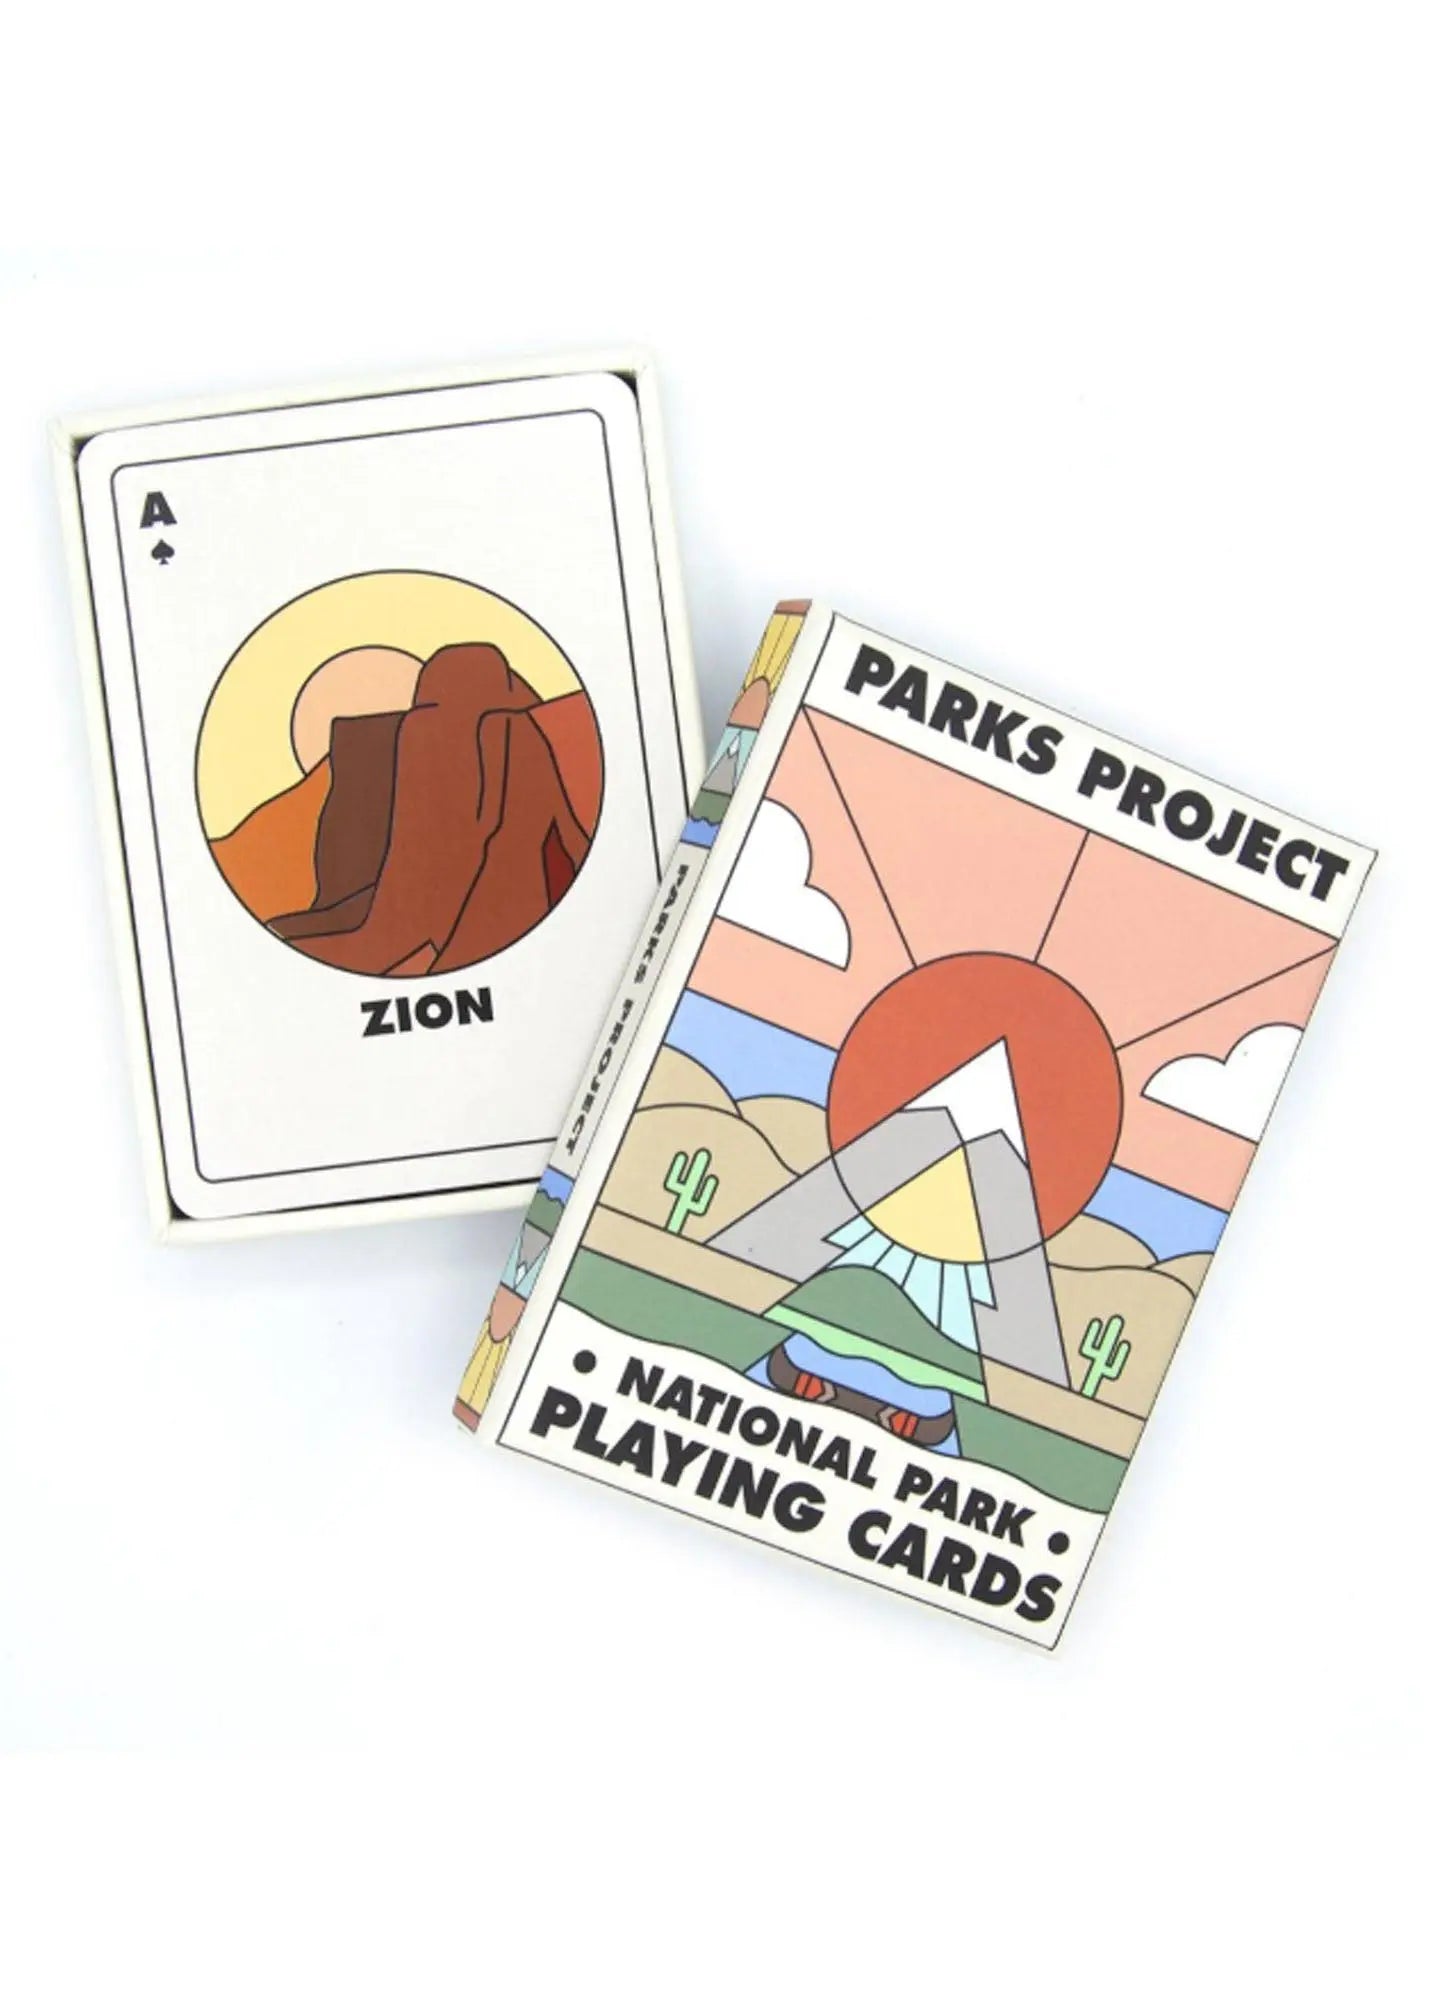 Games Parks Playing Cards Parks Project